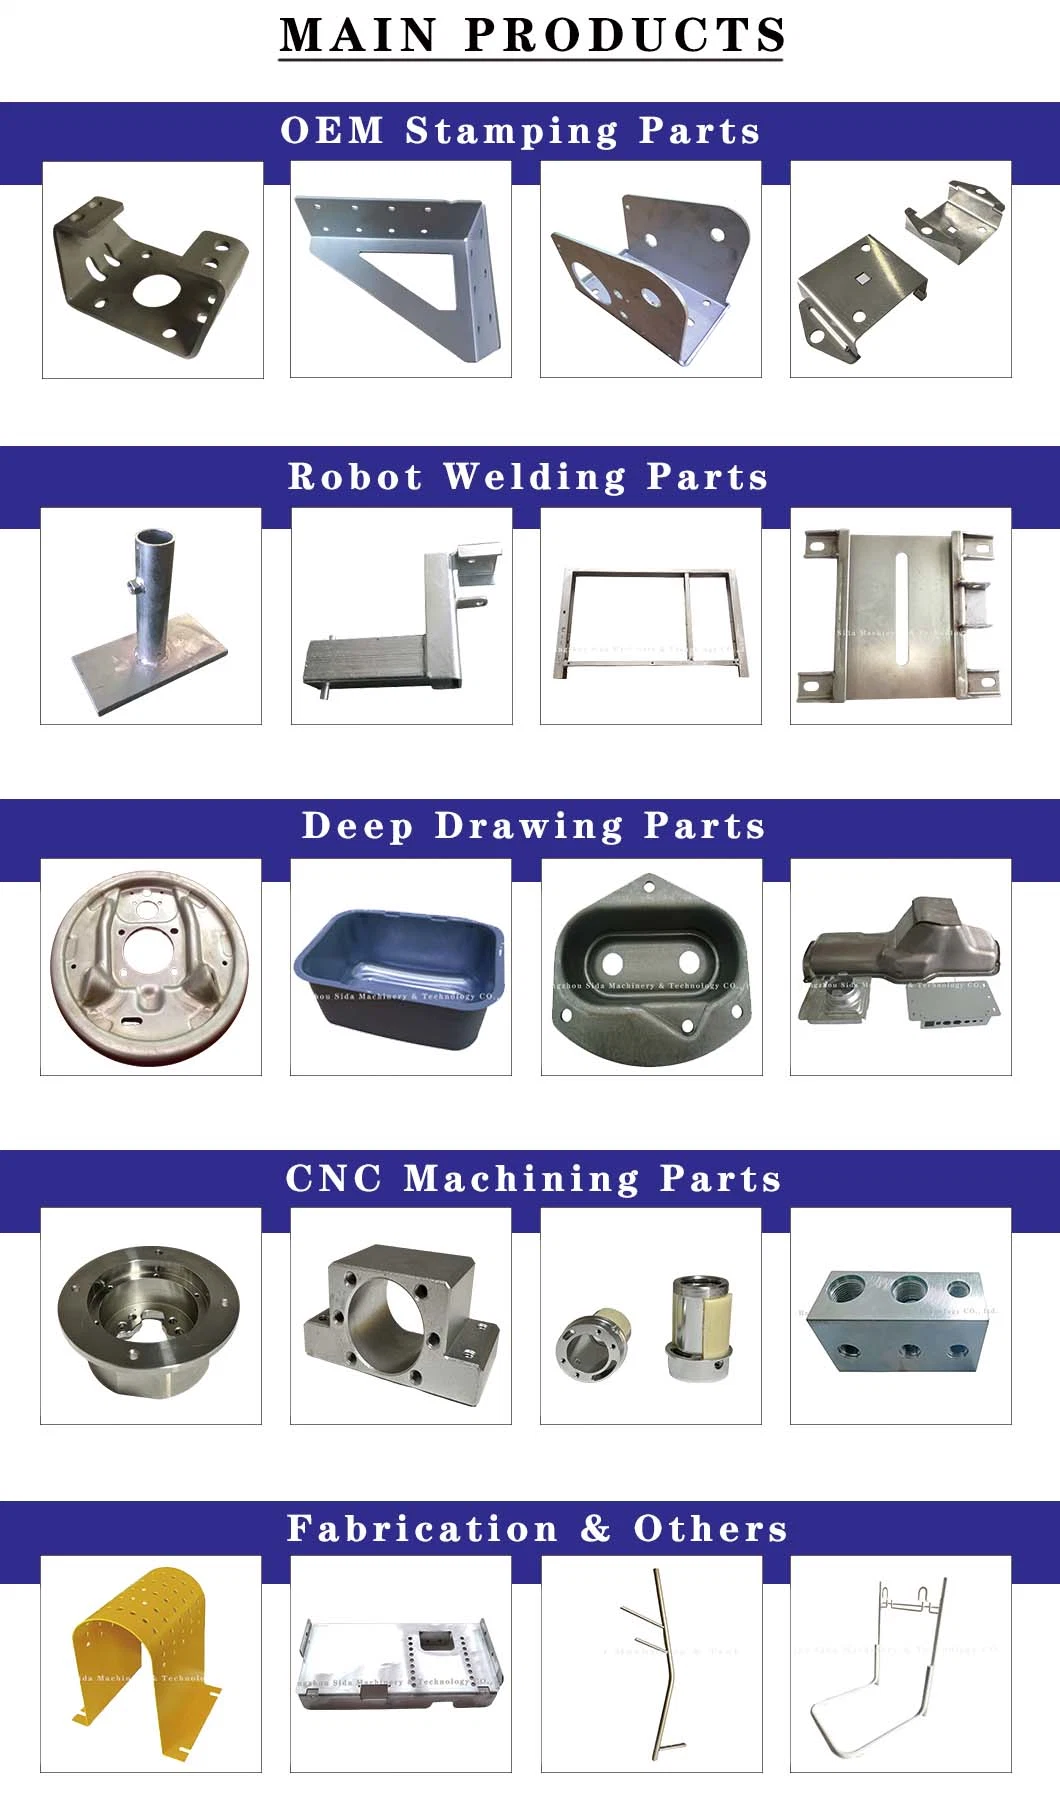 Factory Price Carbon Steel/Stainless Steel Stamping/Welding/Machining/Deep Drawing Parts Automobile/Automotive Part/Auto Spare Parts